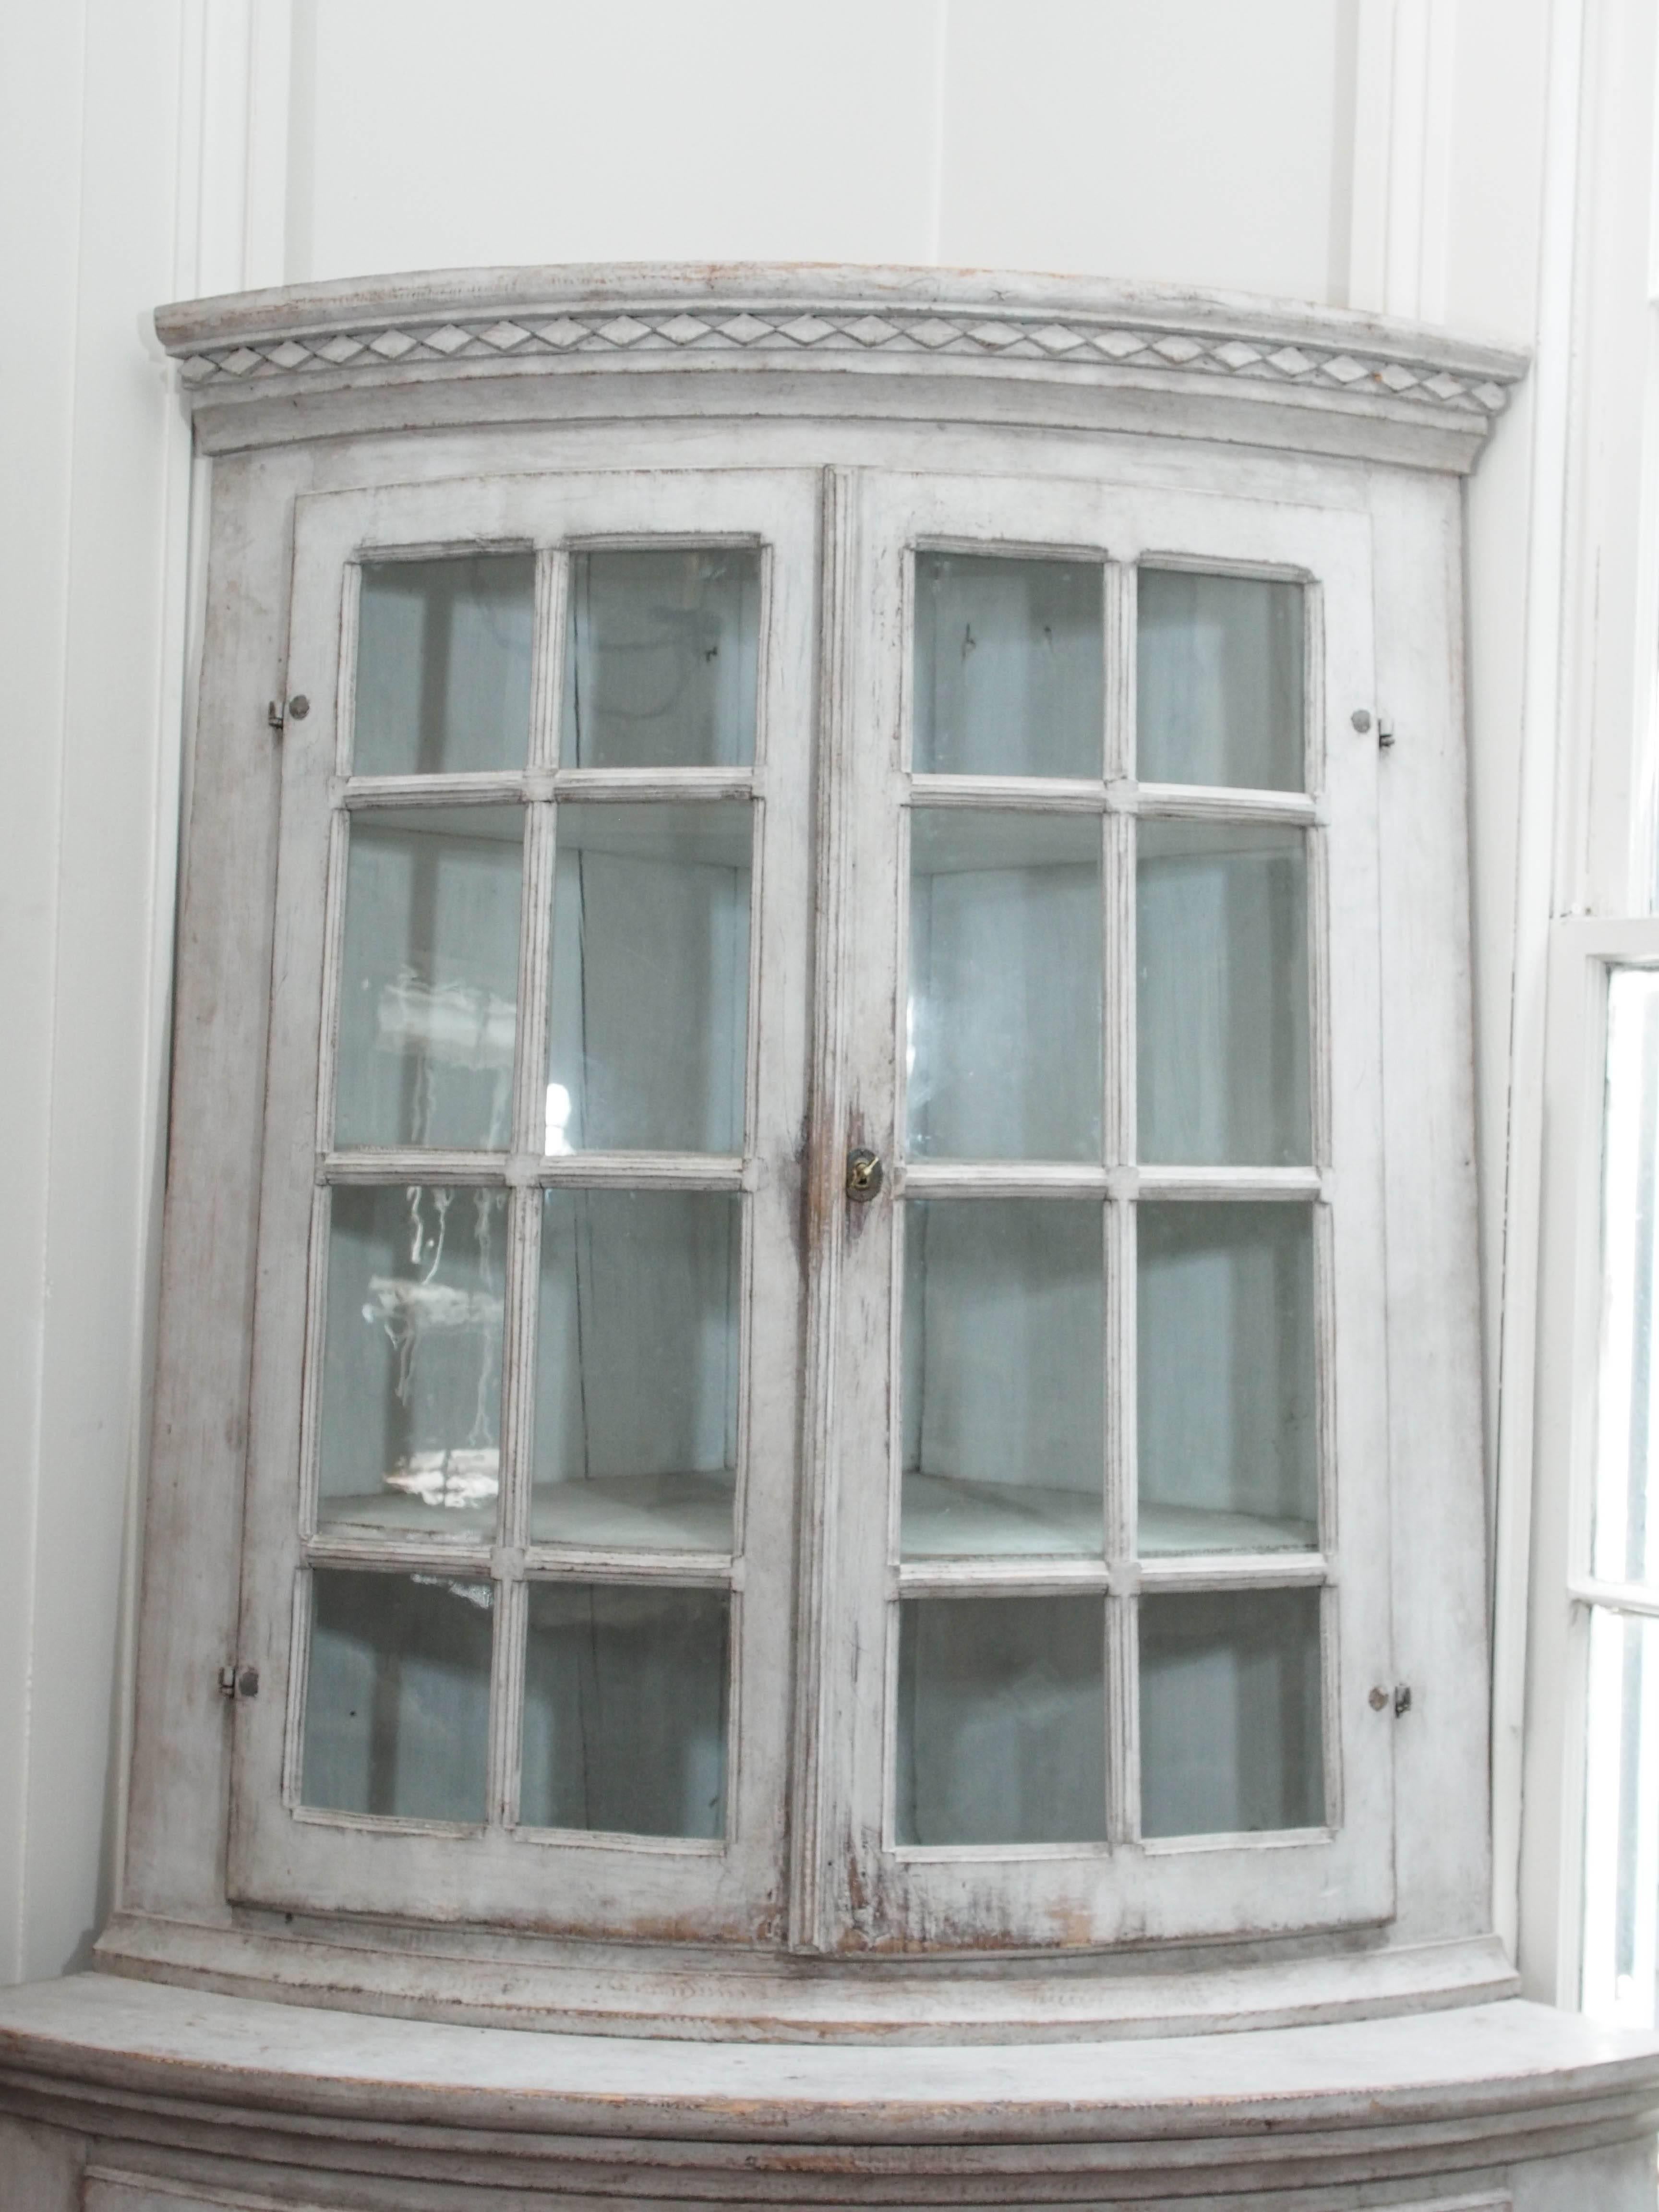 19th Century Gustavian style corner cabinet with glass doors on top and fluted doors on the bottom. Painted in a white /pale gray color. Glass is not original.
3 shelves on top and 2 on the bottom.